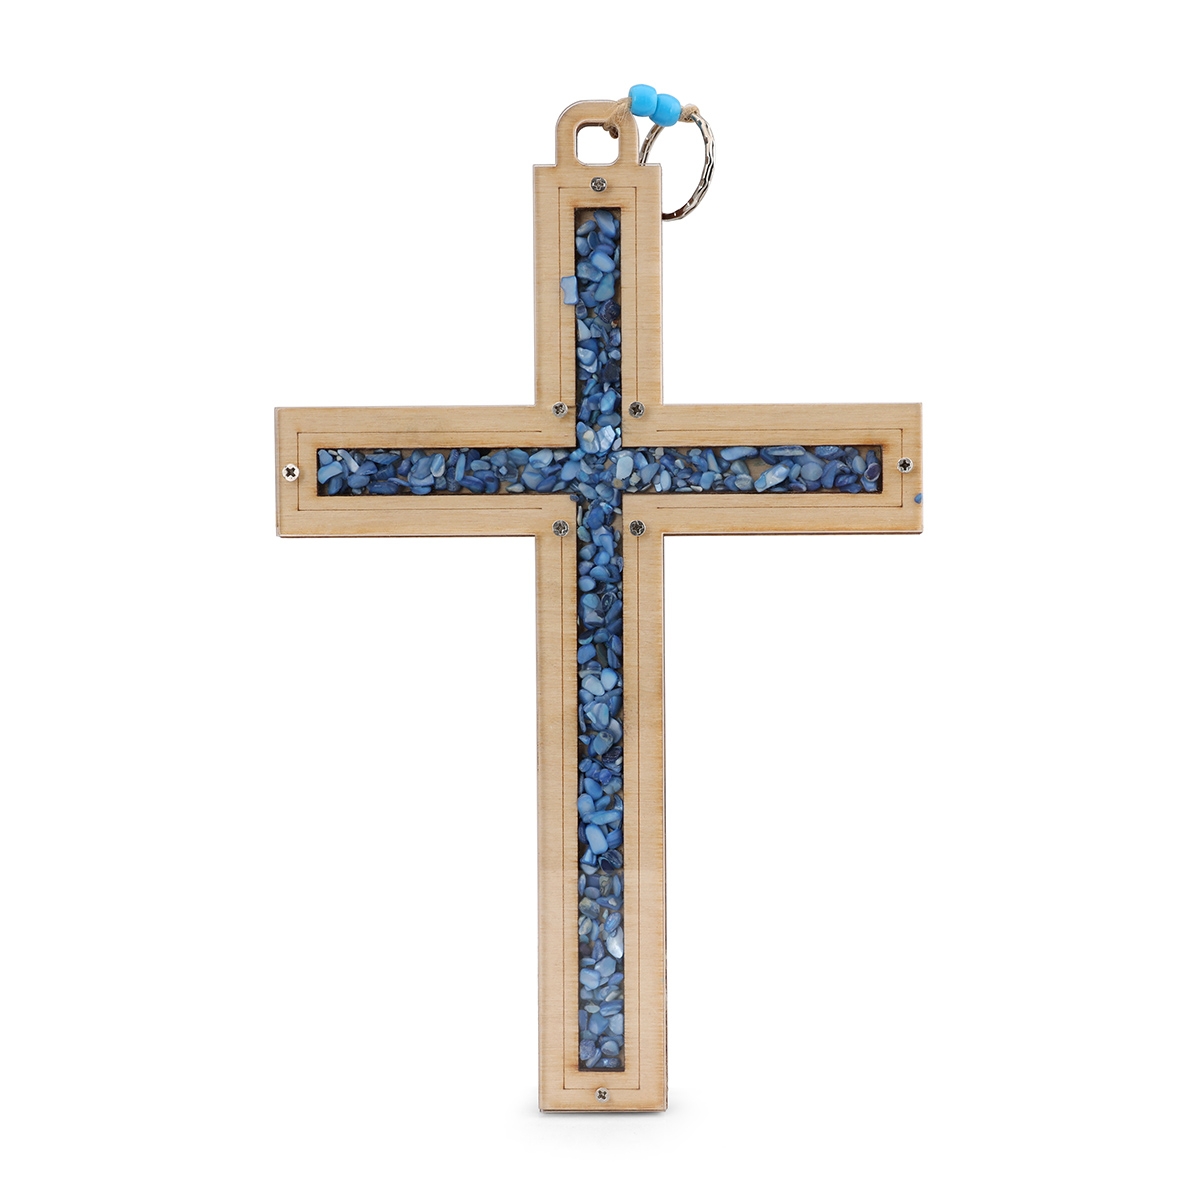 Wooden Cross Wall Hanging with Natural Blue Stones from the Holy Land - 1